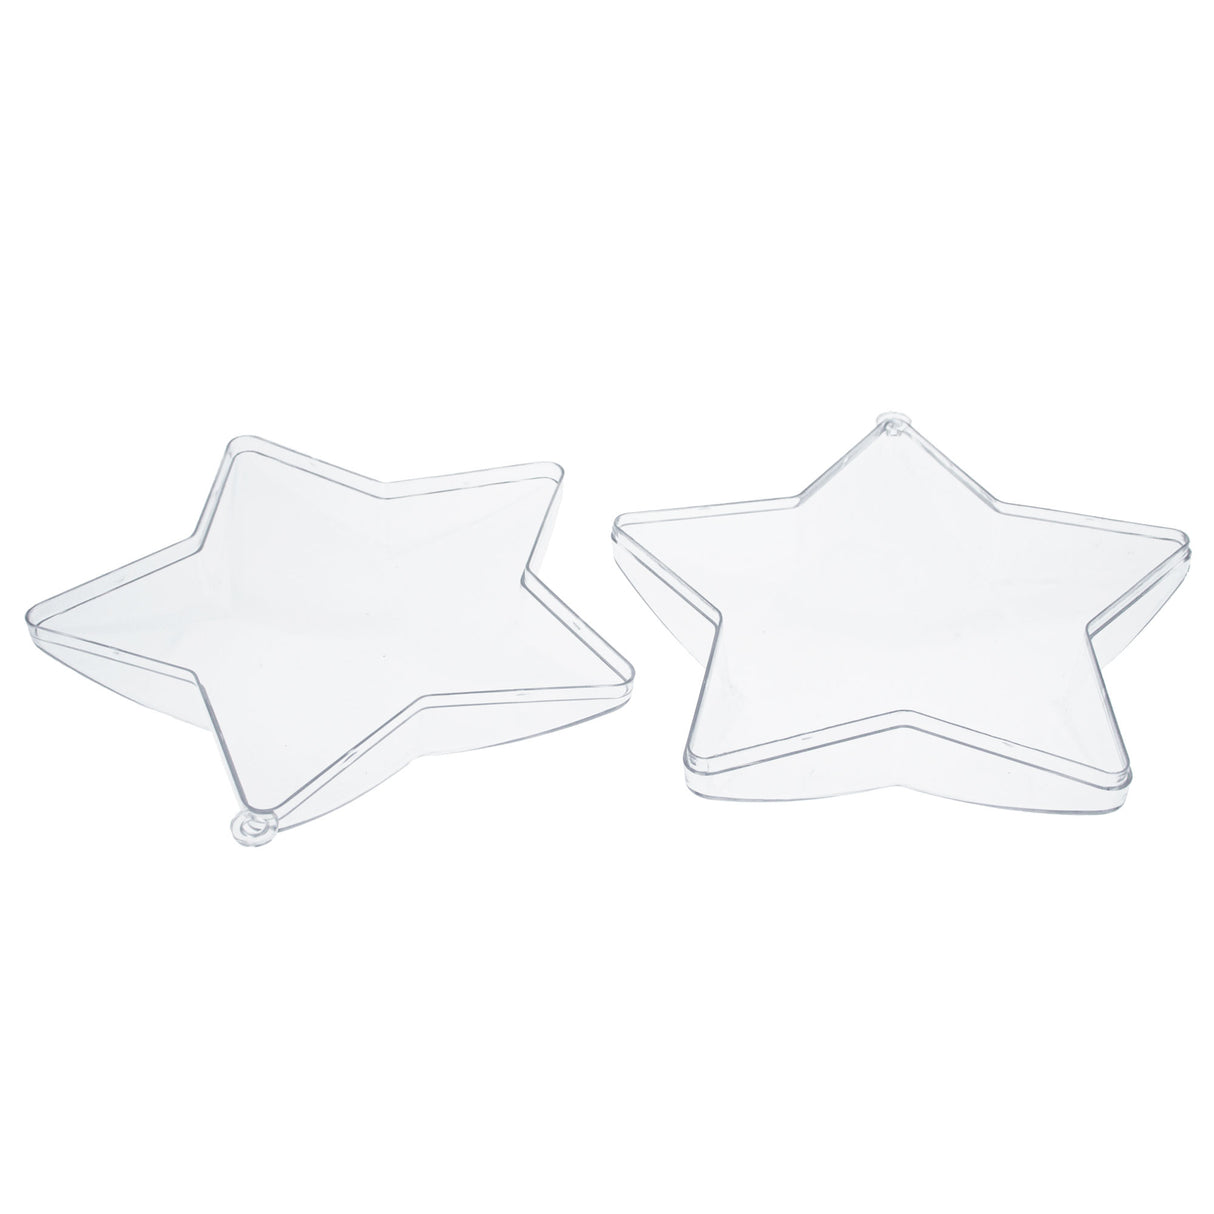 Set of 3 Clear Plastic Star Ornaments 3.25 Inches (83 mm) ,dimensions in inches: 3.25 x 1.45 x 3